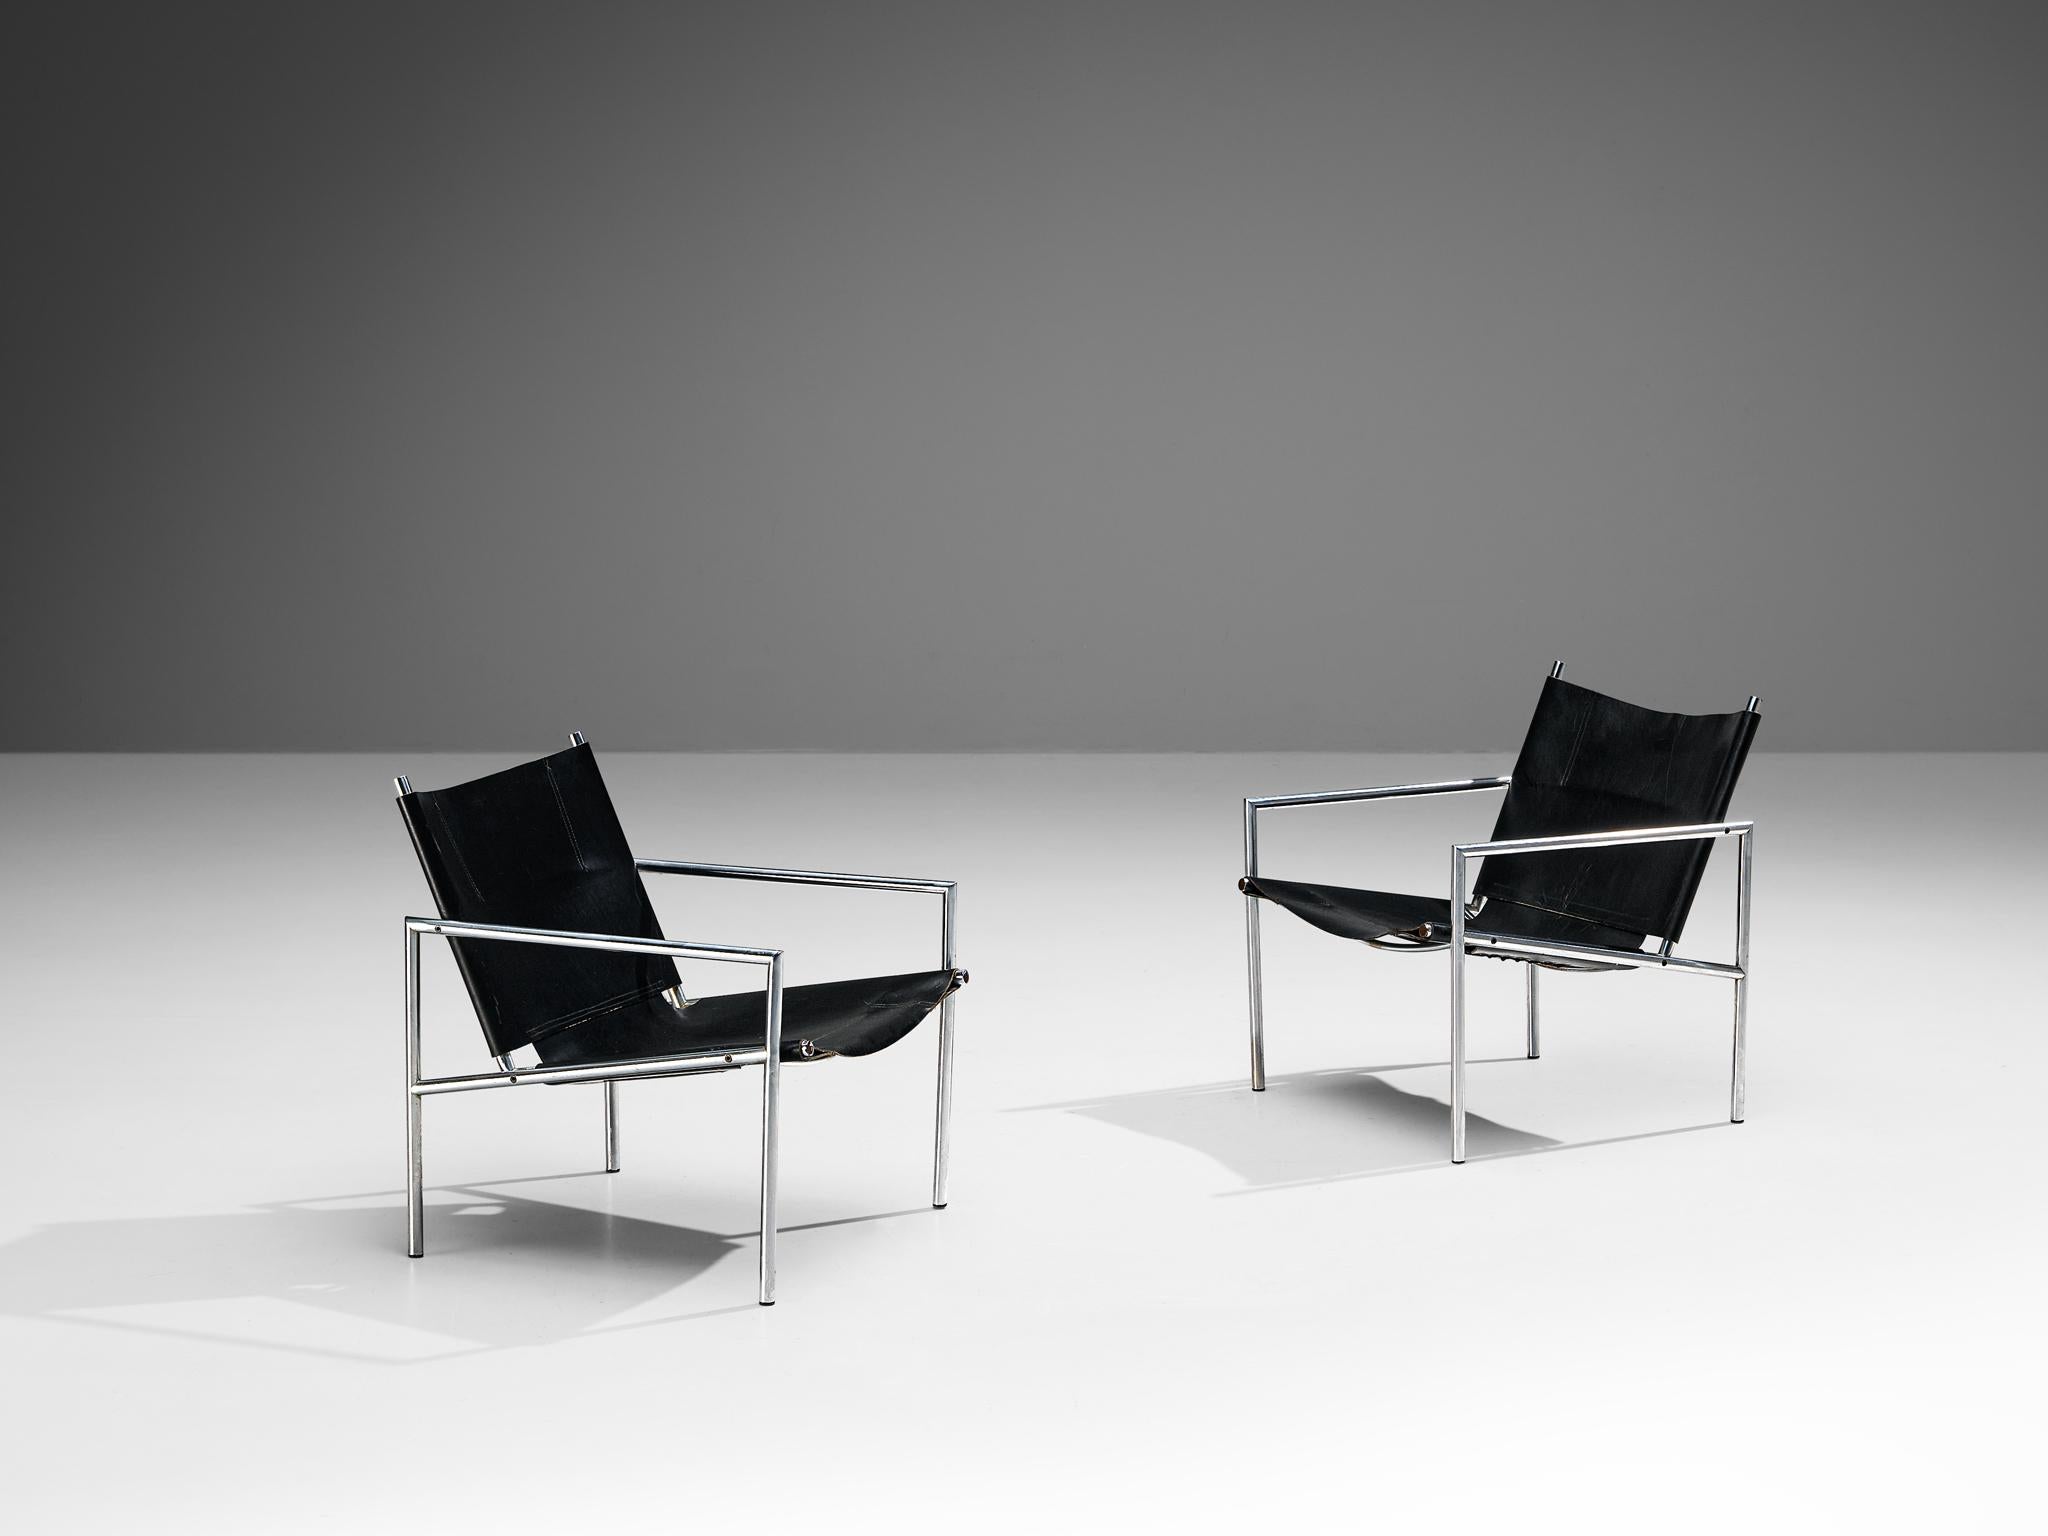 Martin Visser for 't Spectrum, lounge chairs, model 'SZ 02', leather, brushed steel, The Netherlands, 1965

These modern, Minimalist easy chairs are made of a tubular brushed steel in combination with black leather upholstery. The open